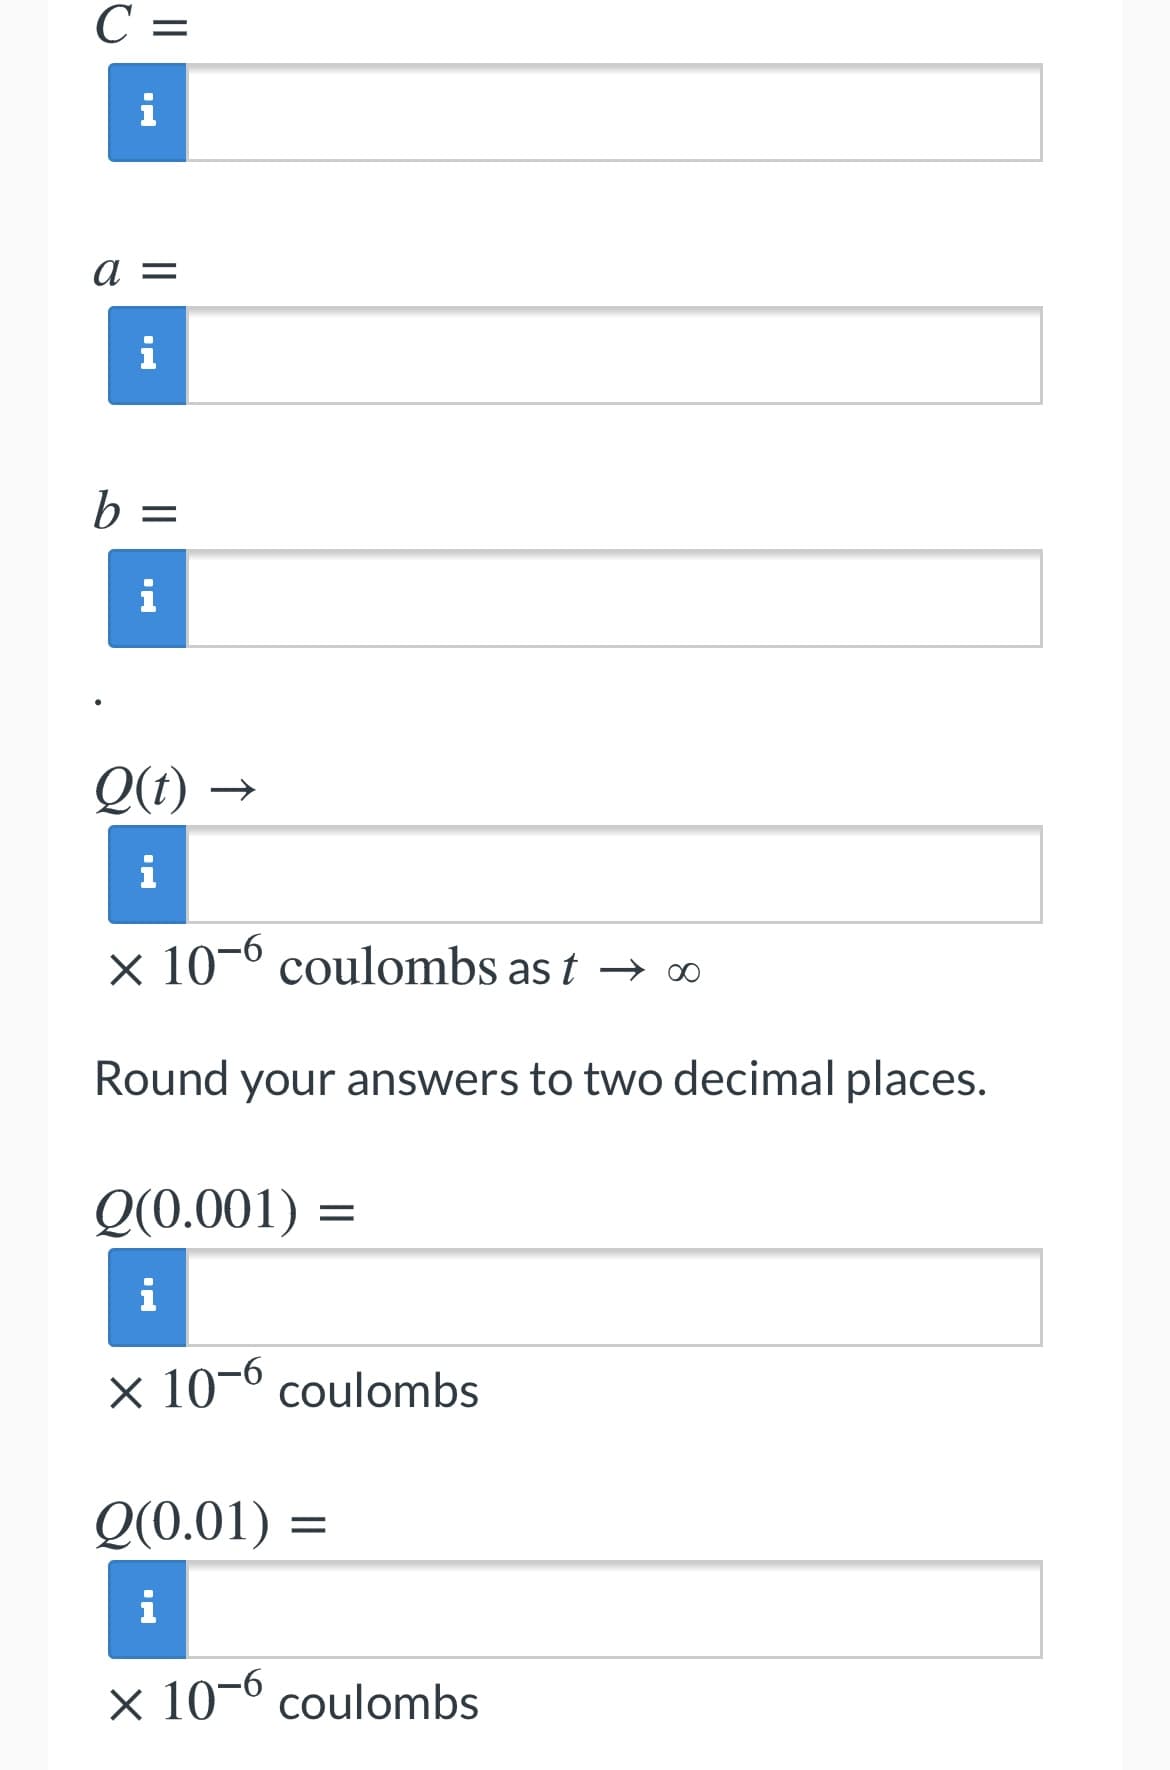 С —
i
a =
i
b =
i
Q(t) →
i
x 10-0 coulombs as t → ∞
Round your answers to two decimal places.
Q(0.001) =
i
× 10-º coulombs
Q(0.01) =
i
x 10-0 coulombs
